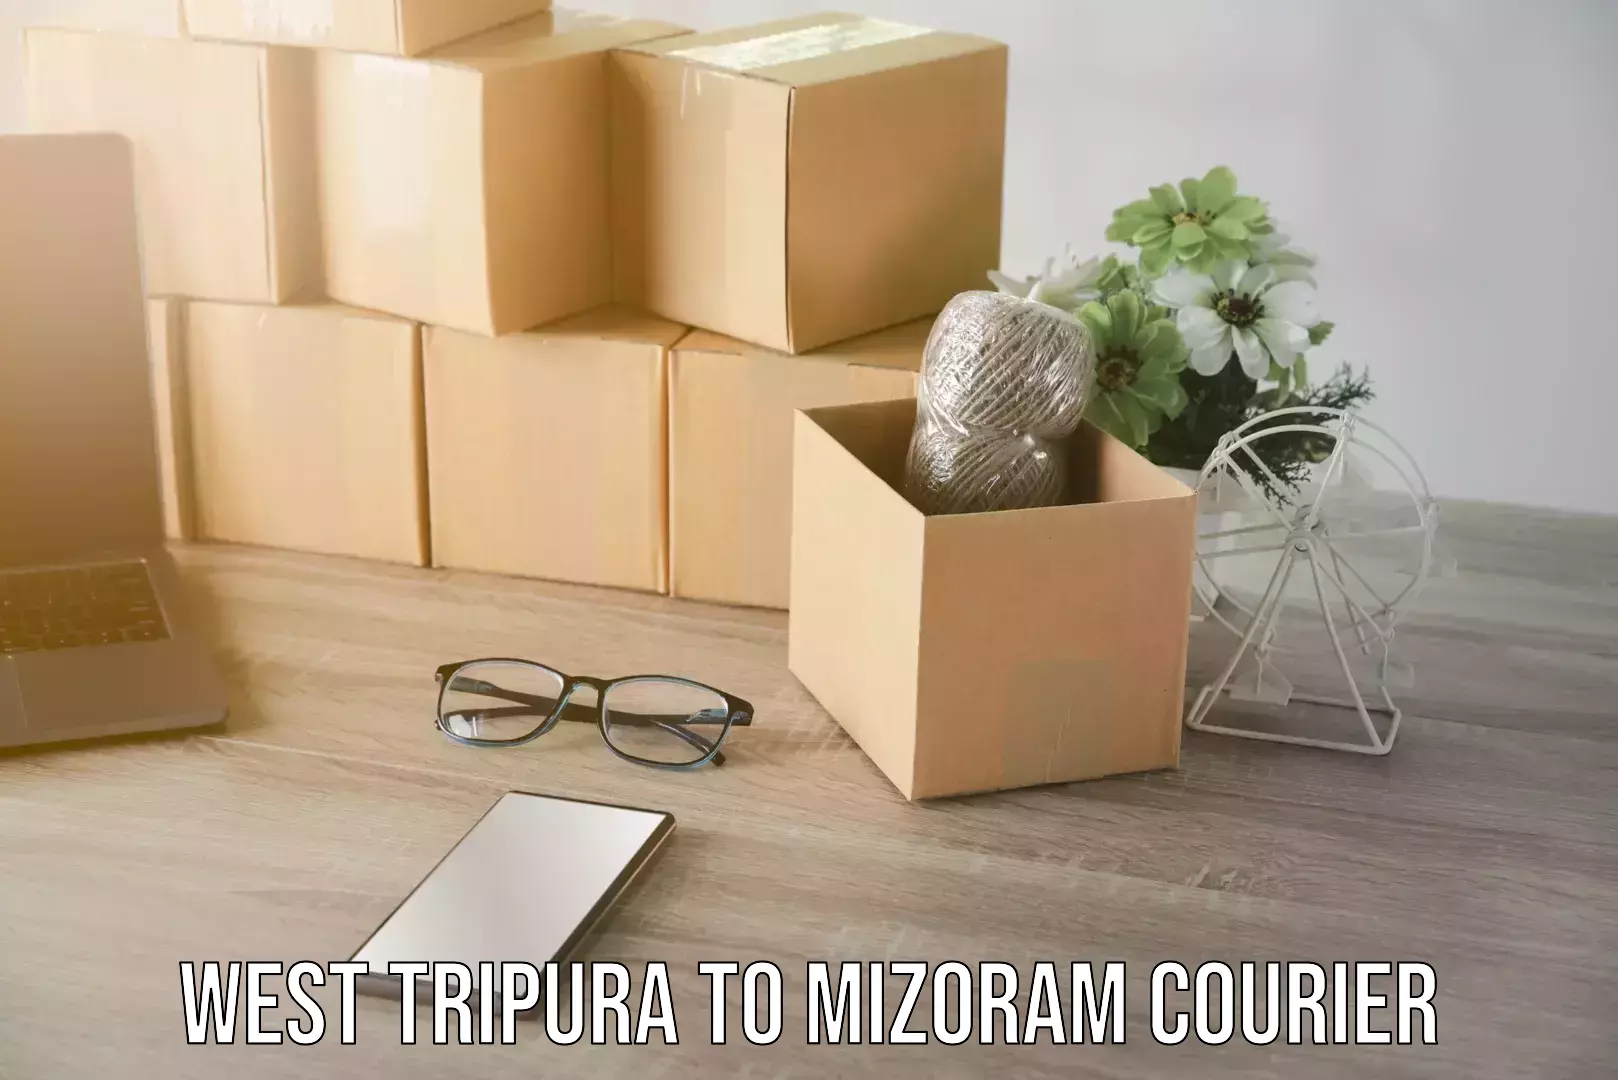 Nationwide delivery network West Tripura to Mizoram